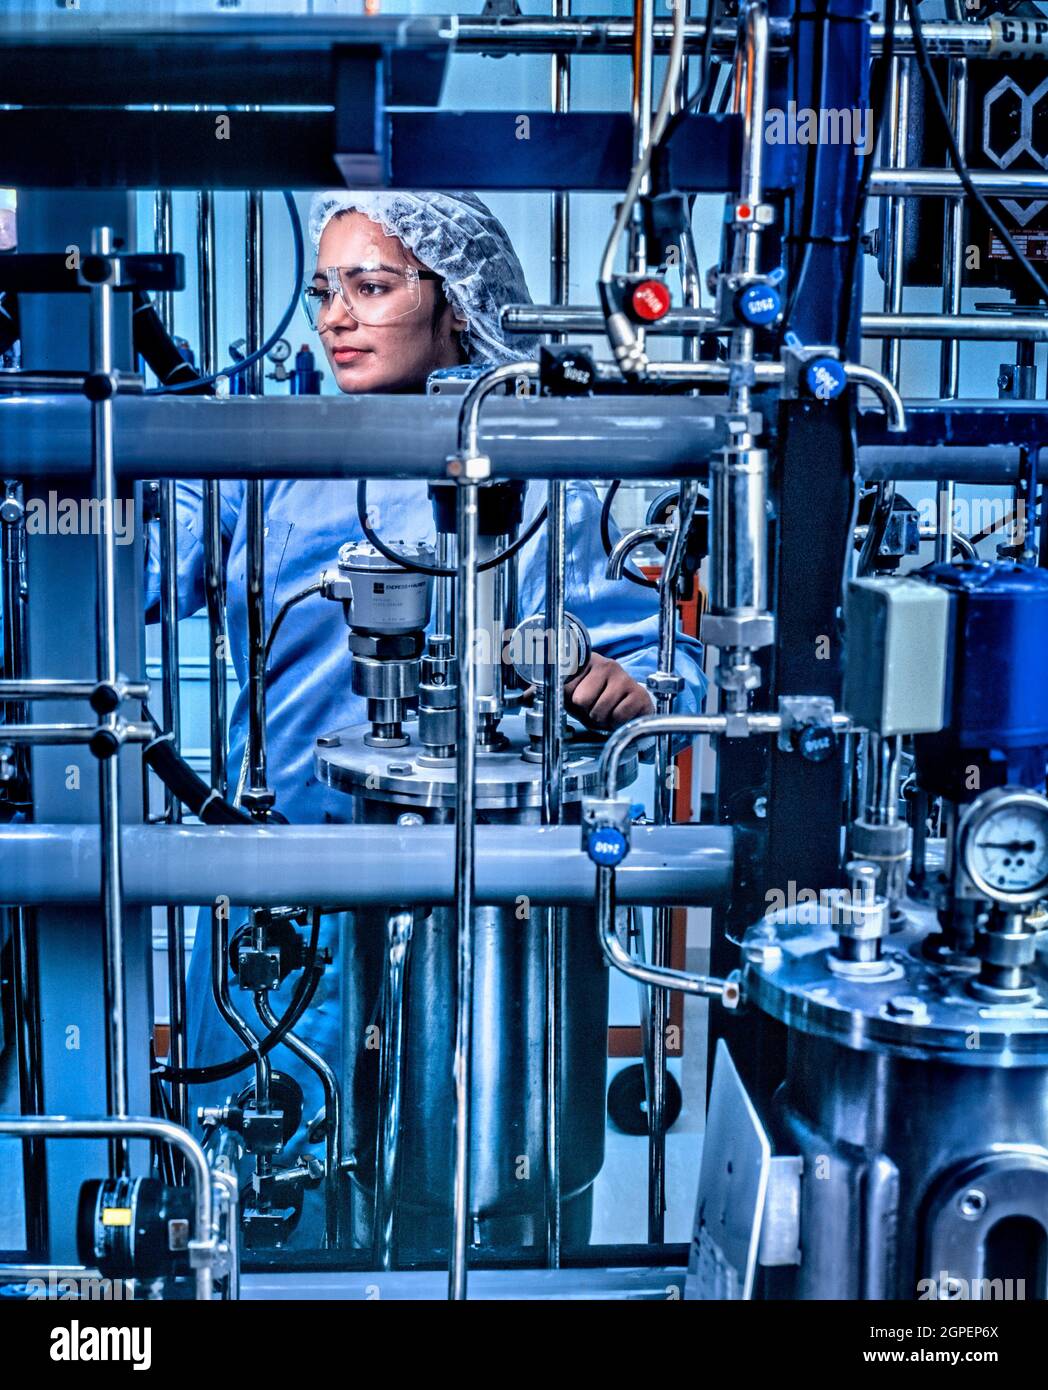 Woman technician wearing clean-room clothing adjusting fermentor culturing yeast cells which are genetically engineered to produce proteins designed f Stock Photo